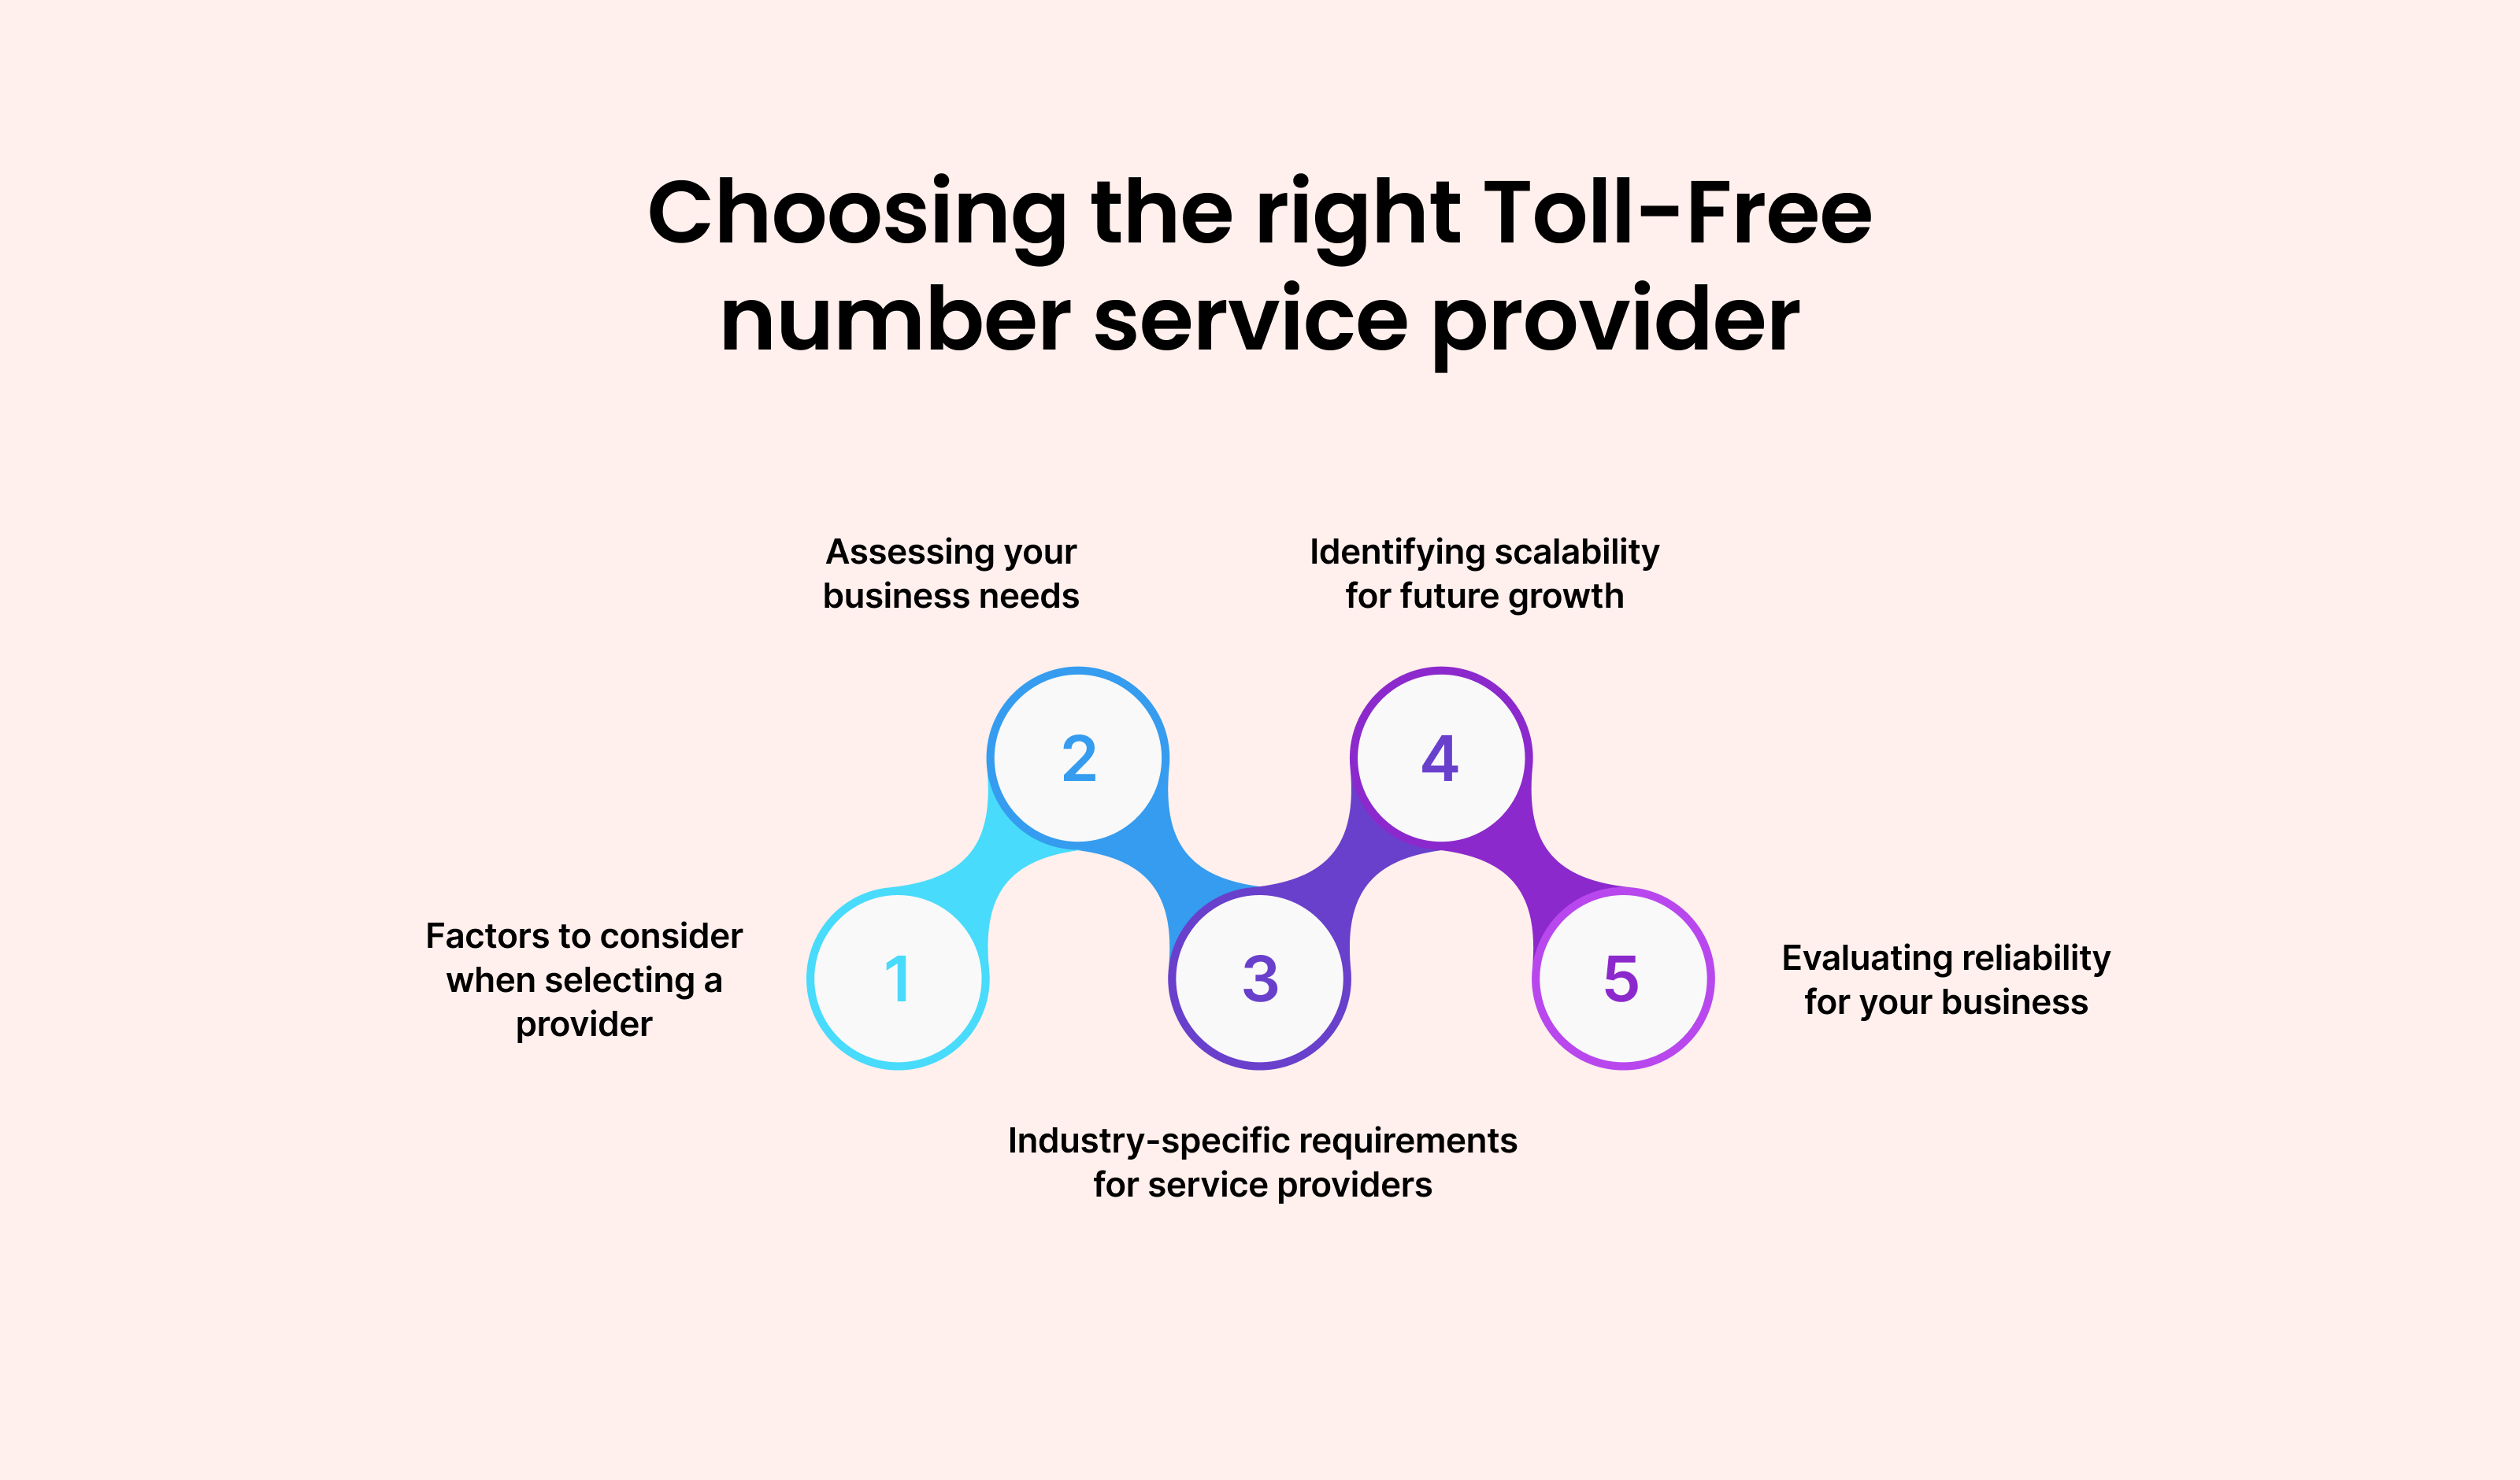 Choosing the Right Toll-Free Number Service Provider: